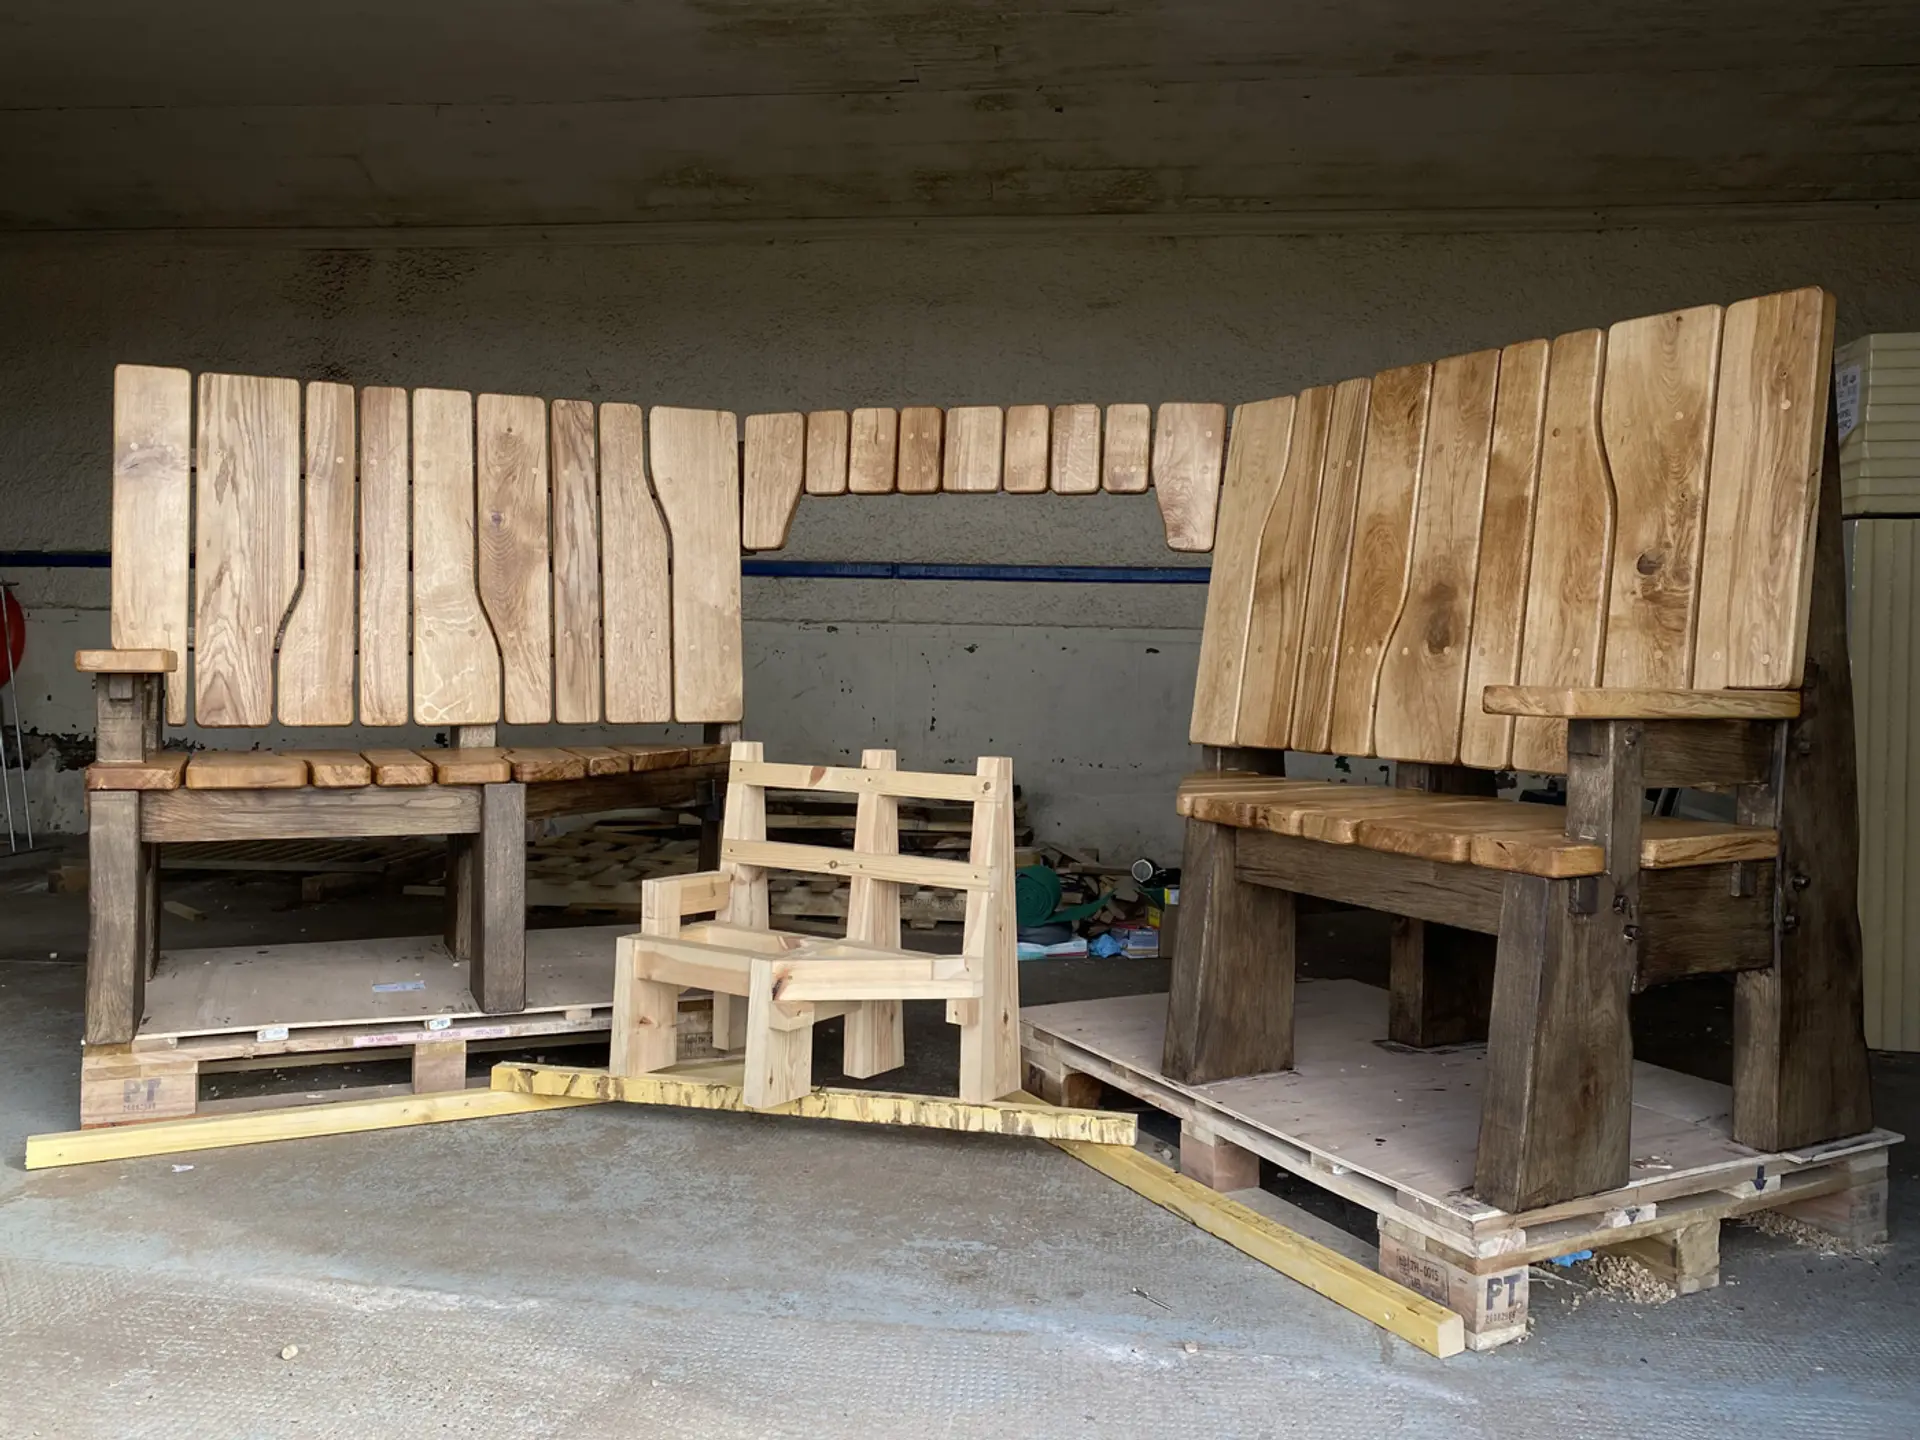 Inside an empty-looking shed or storage place a large, fully built oak bench sits behind a much smaller version of the same bench. They are raised up on large wooden palettes.